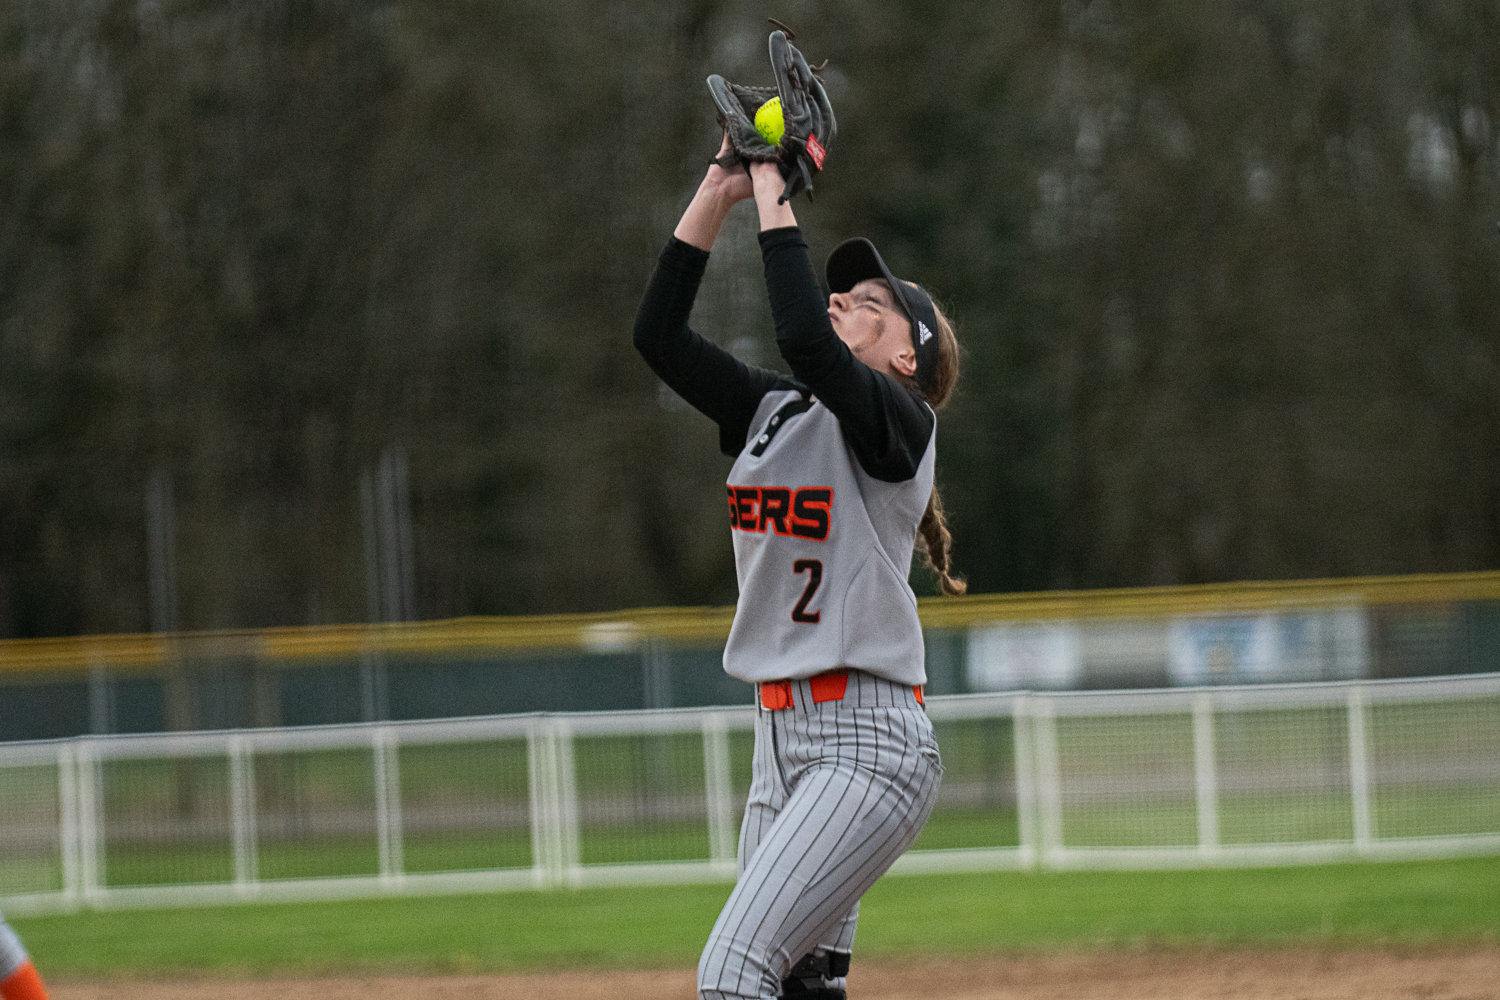 Lauren Wasson comes down with a popup during Centralia's 5-3 win over W.F. West on March 28.